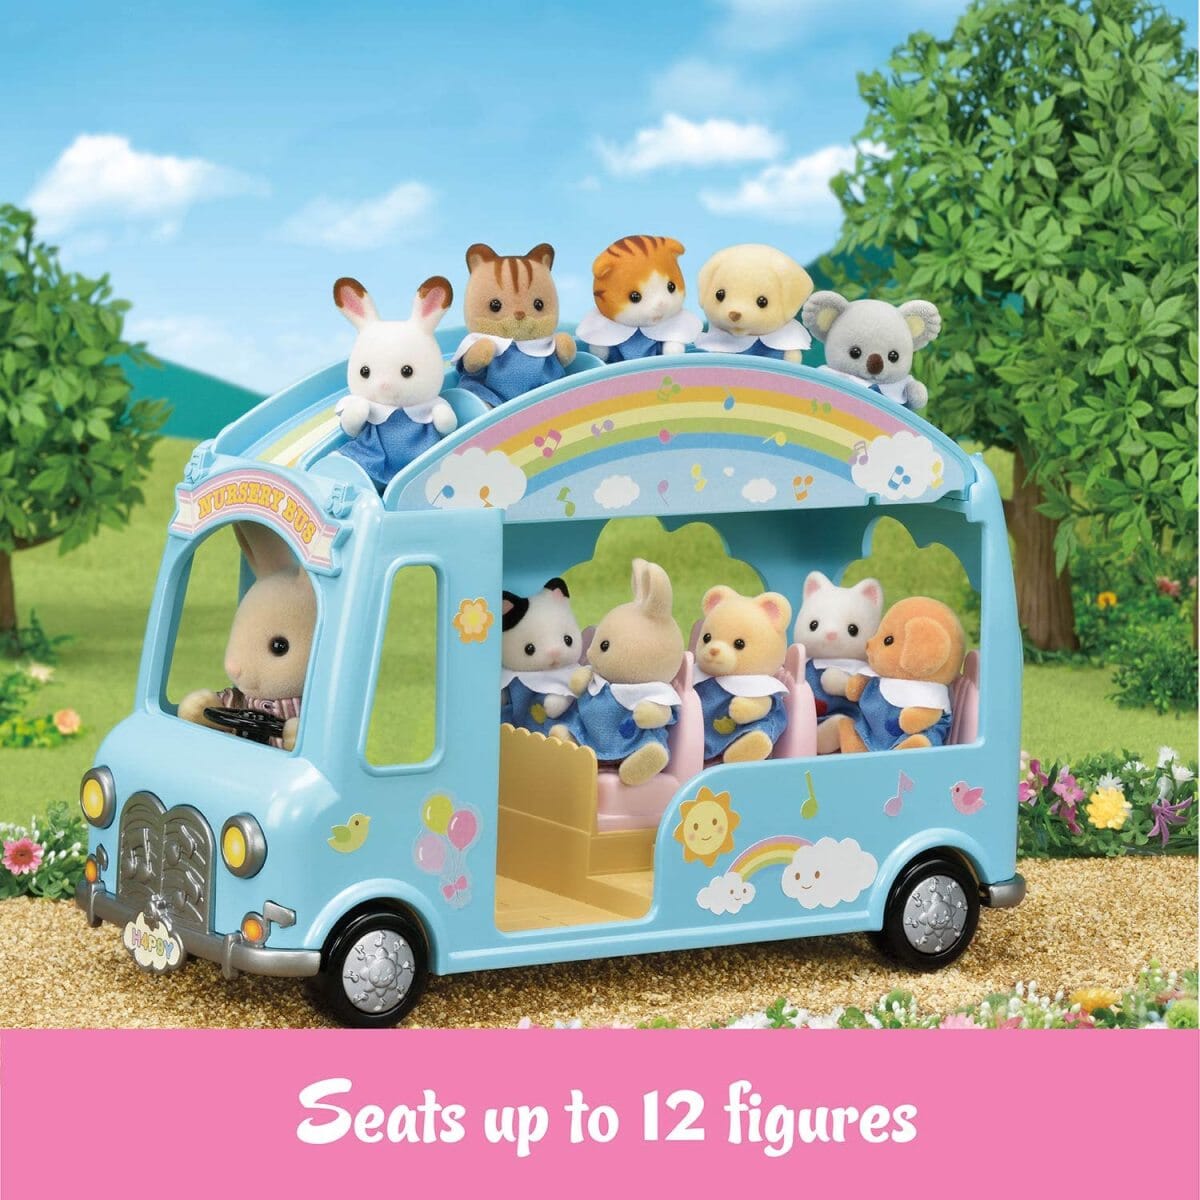 Sunshine Nursery Bus by Calico Critters